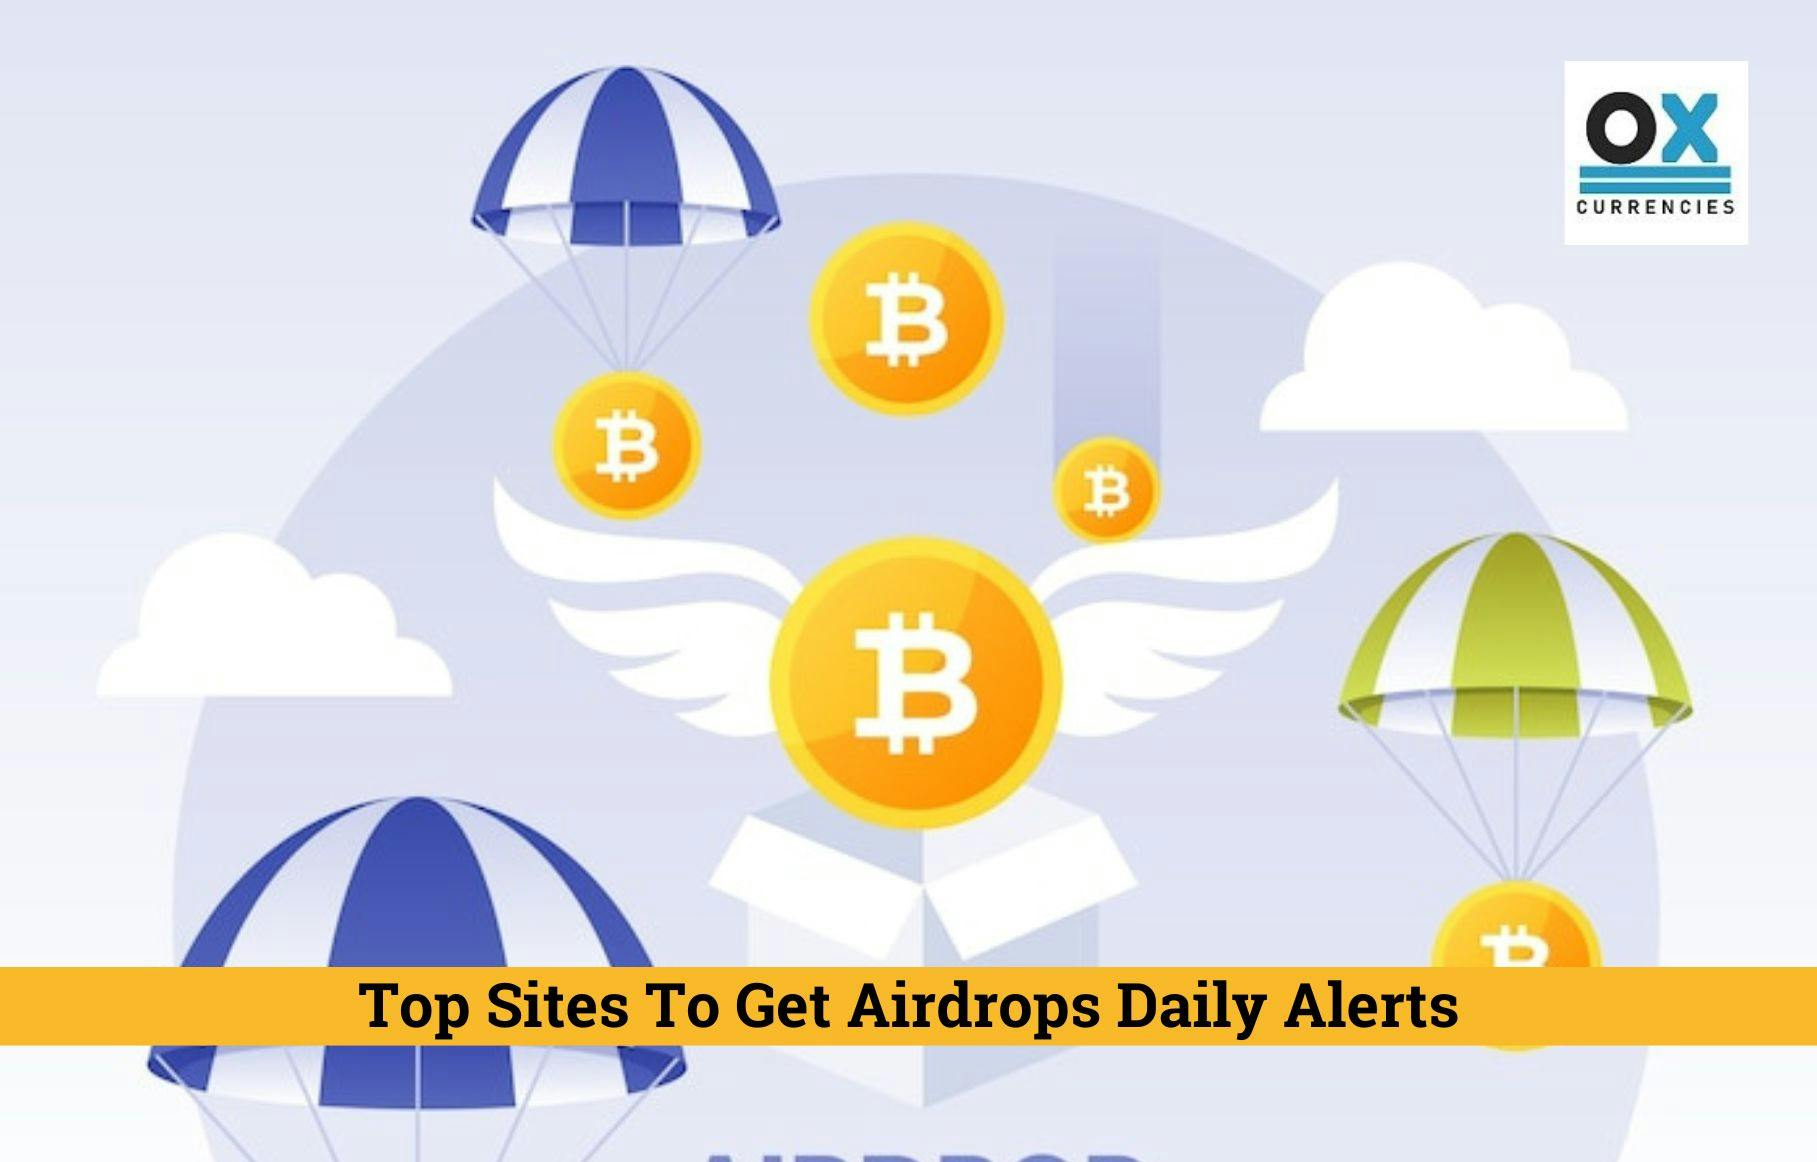 Top Sites To Get Airdrop Daily Alerts